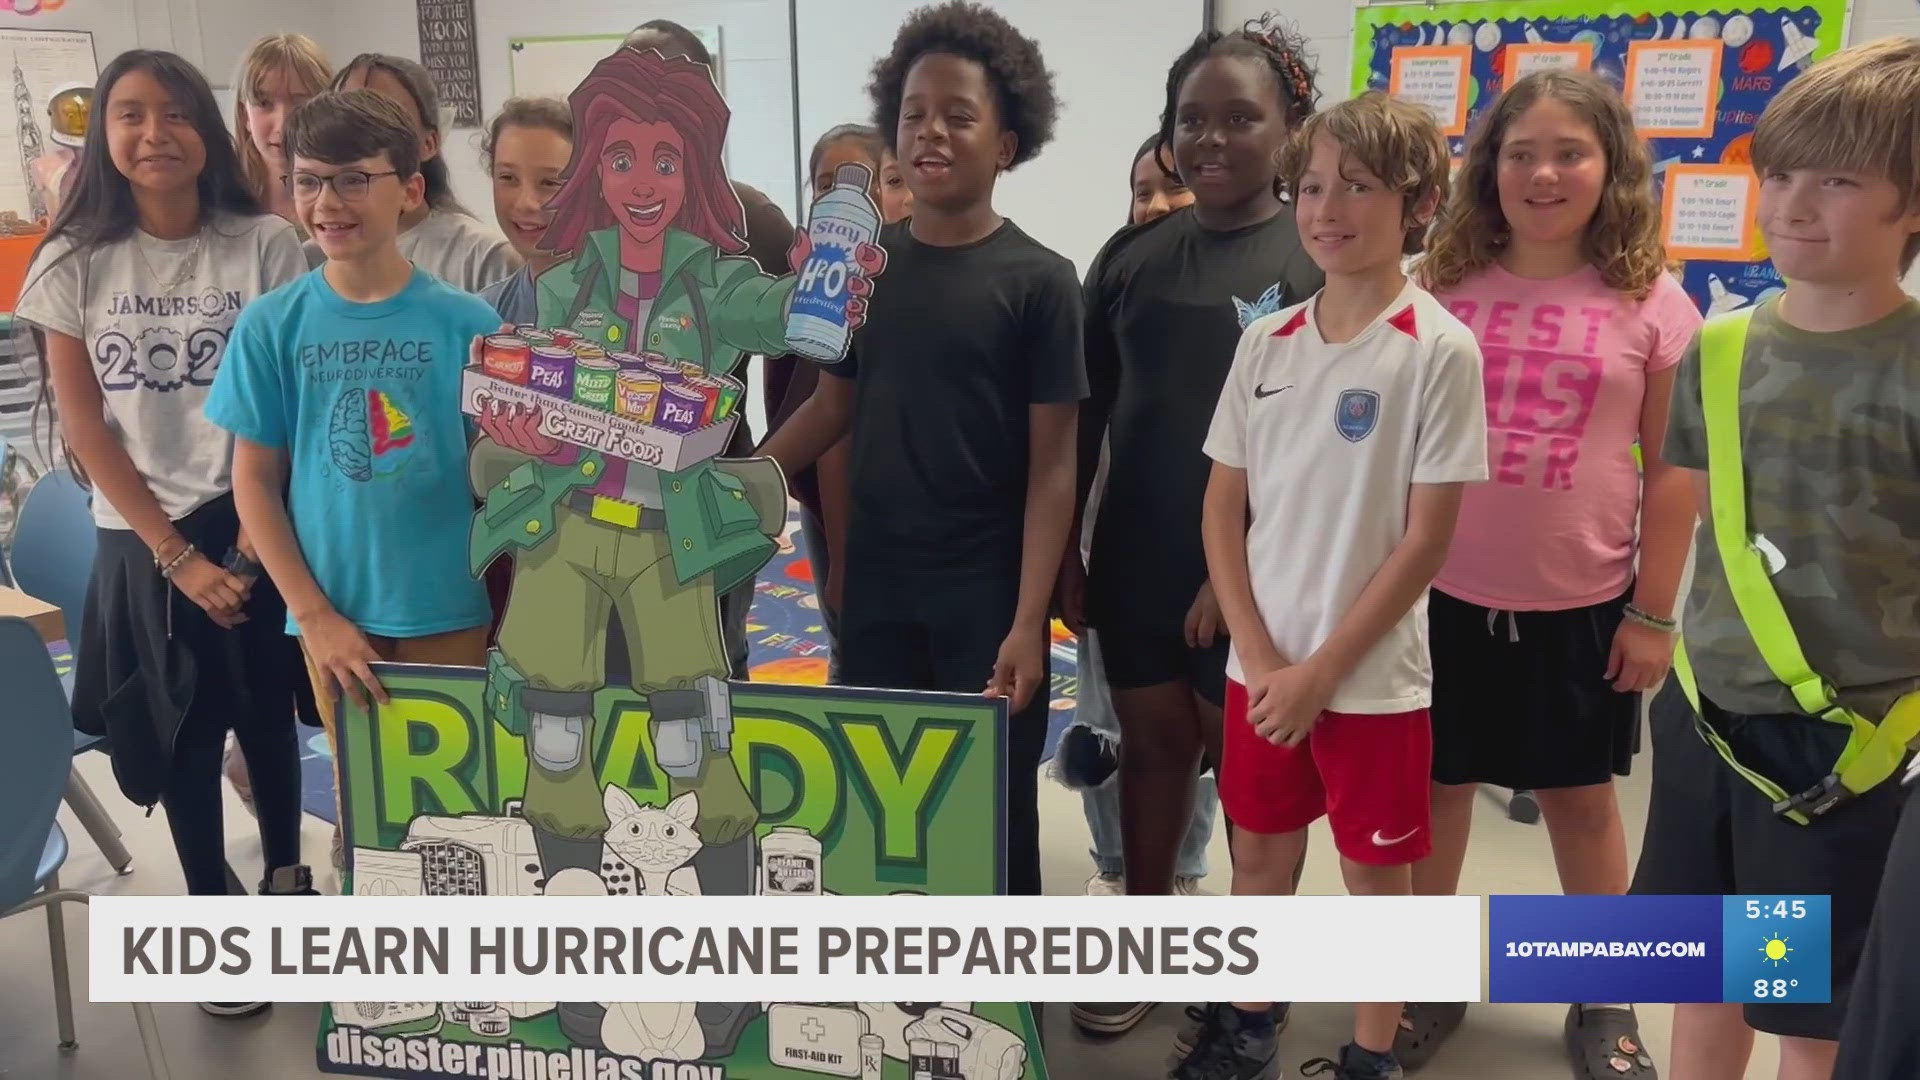 The 5th graders took on the teacher role to help make sure the 1st graders were well-prepared for a hurricane.